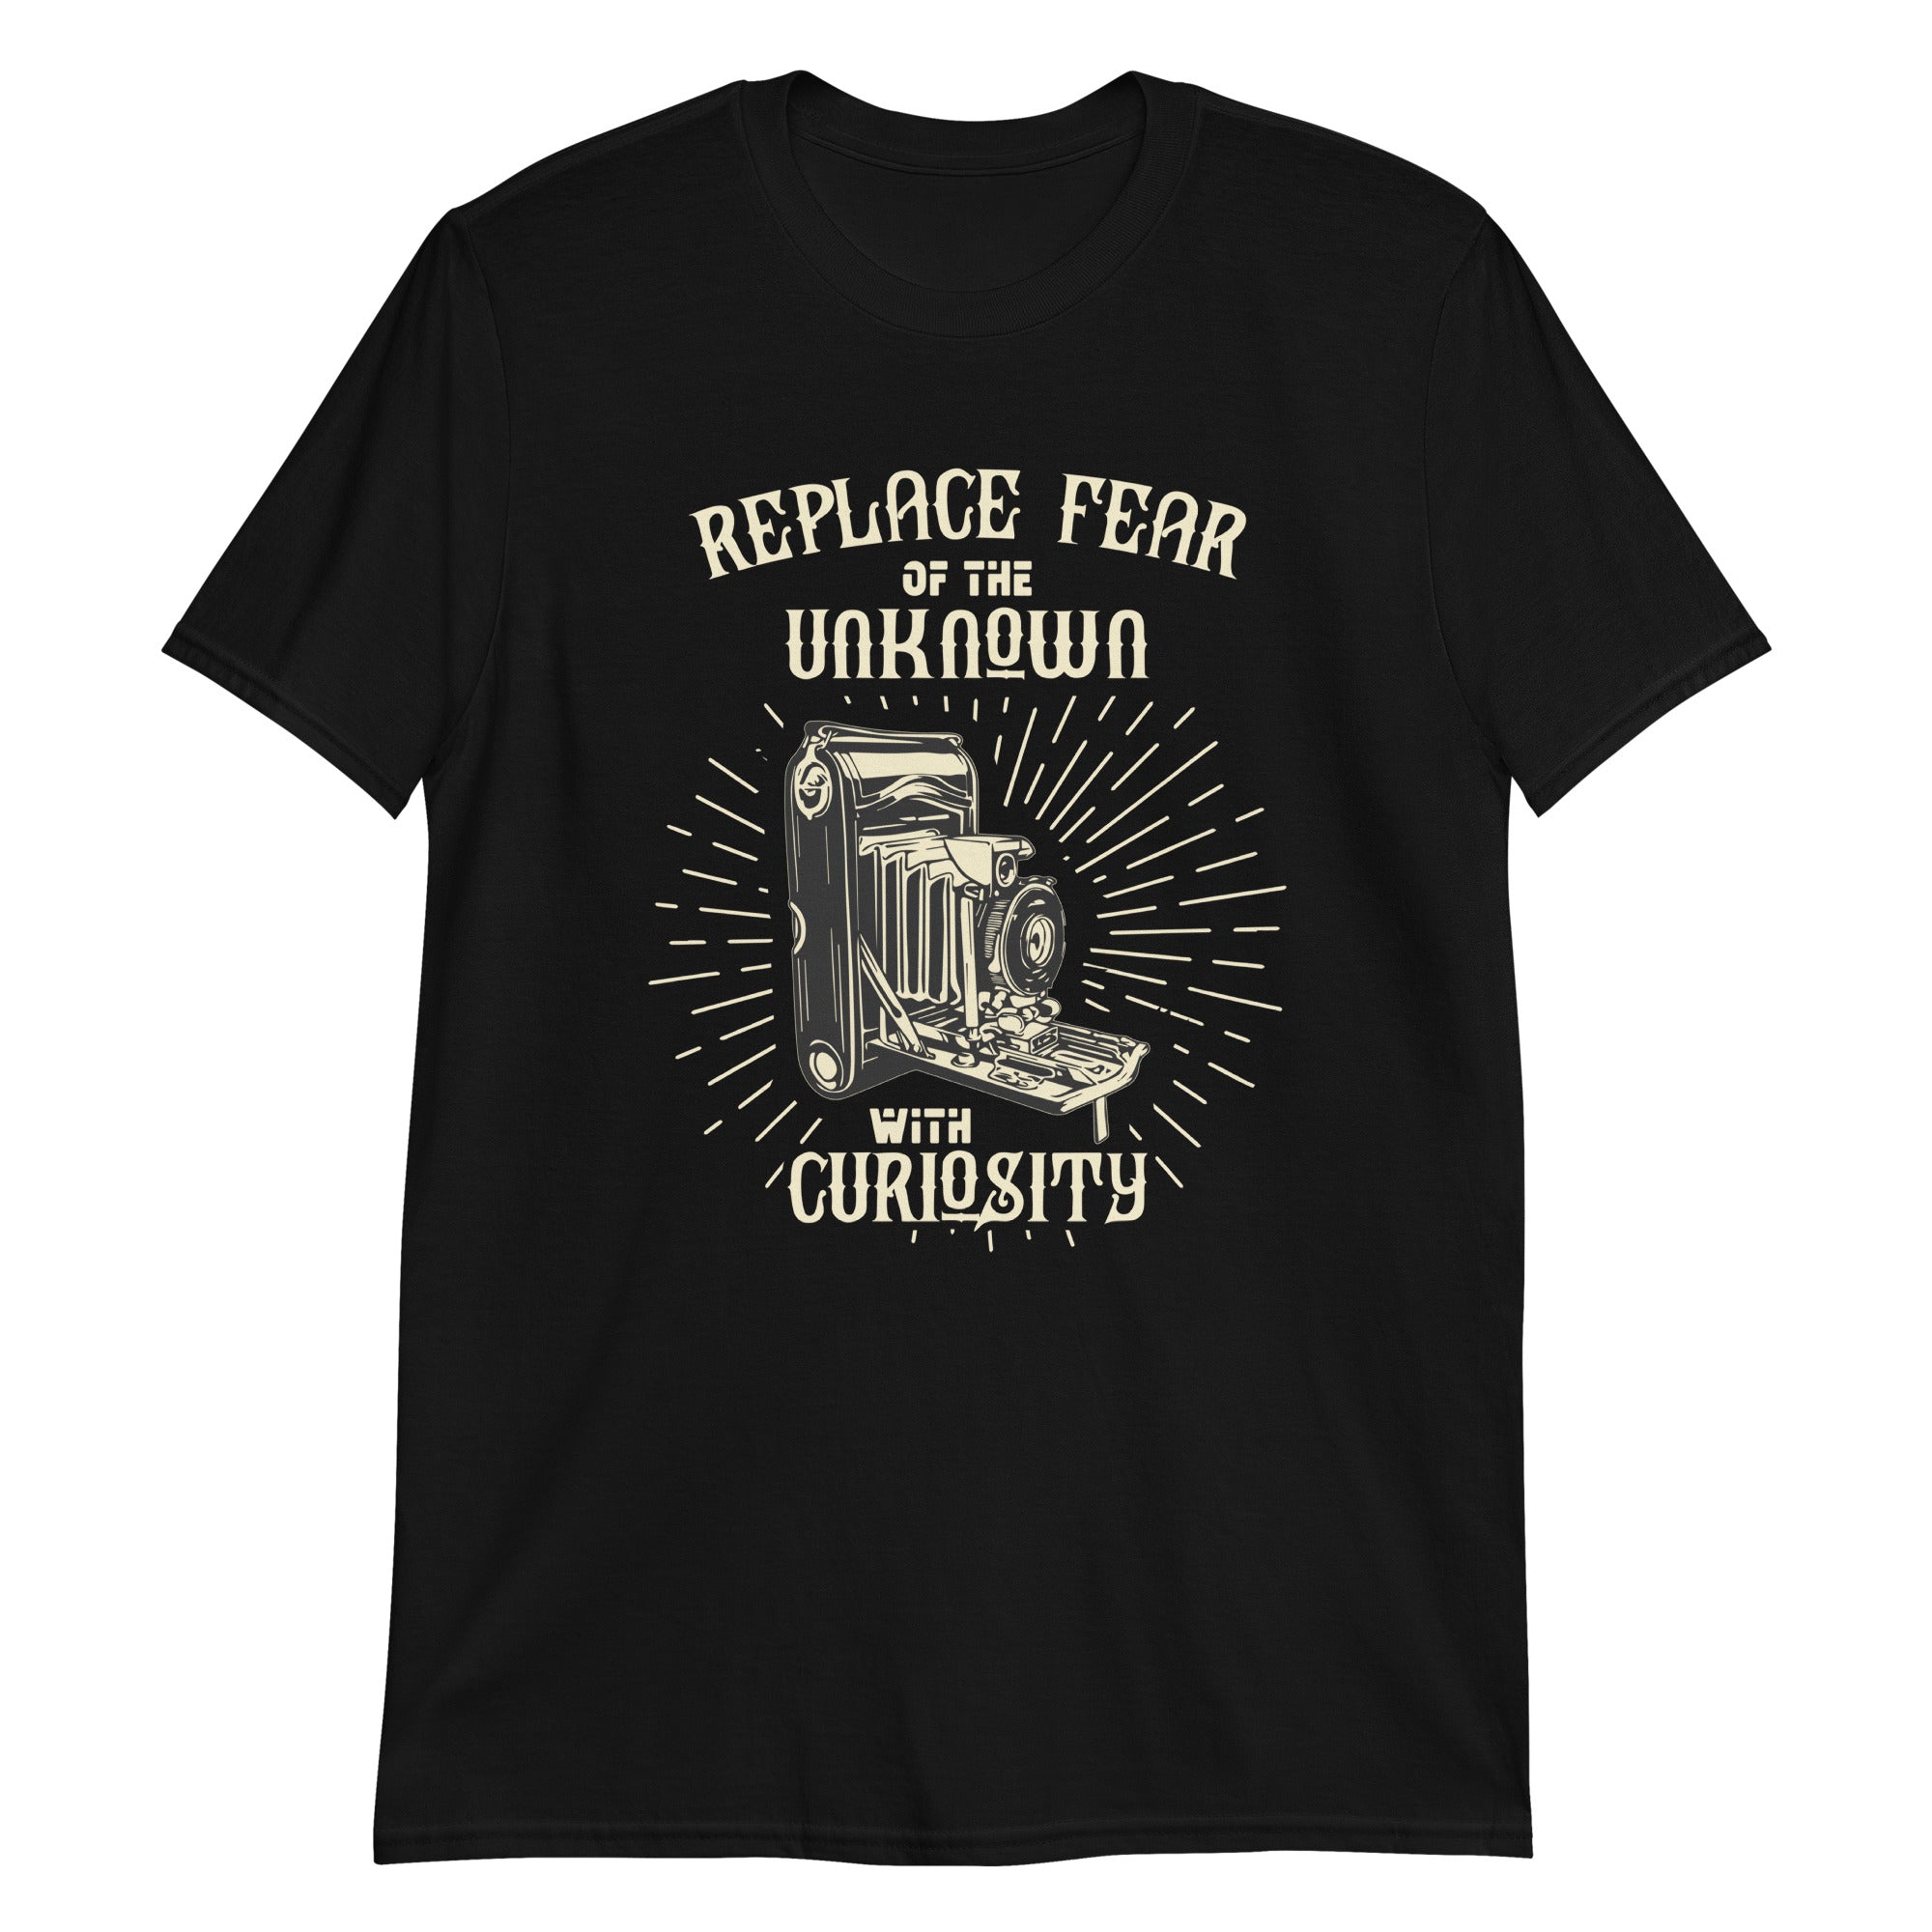 Replace Fear with Curiosity Unisex T-Shirt